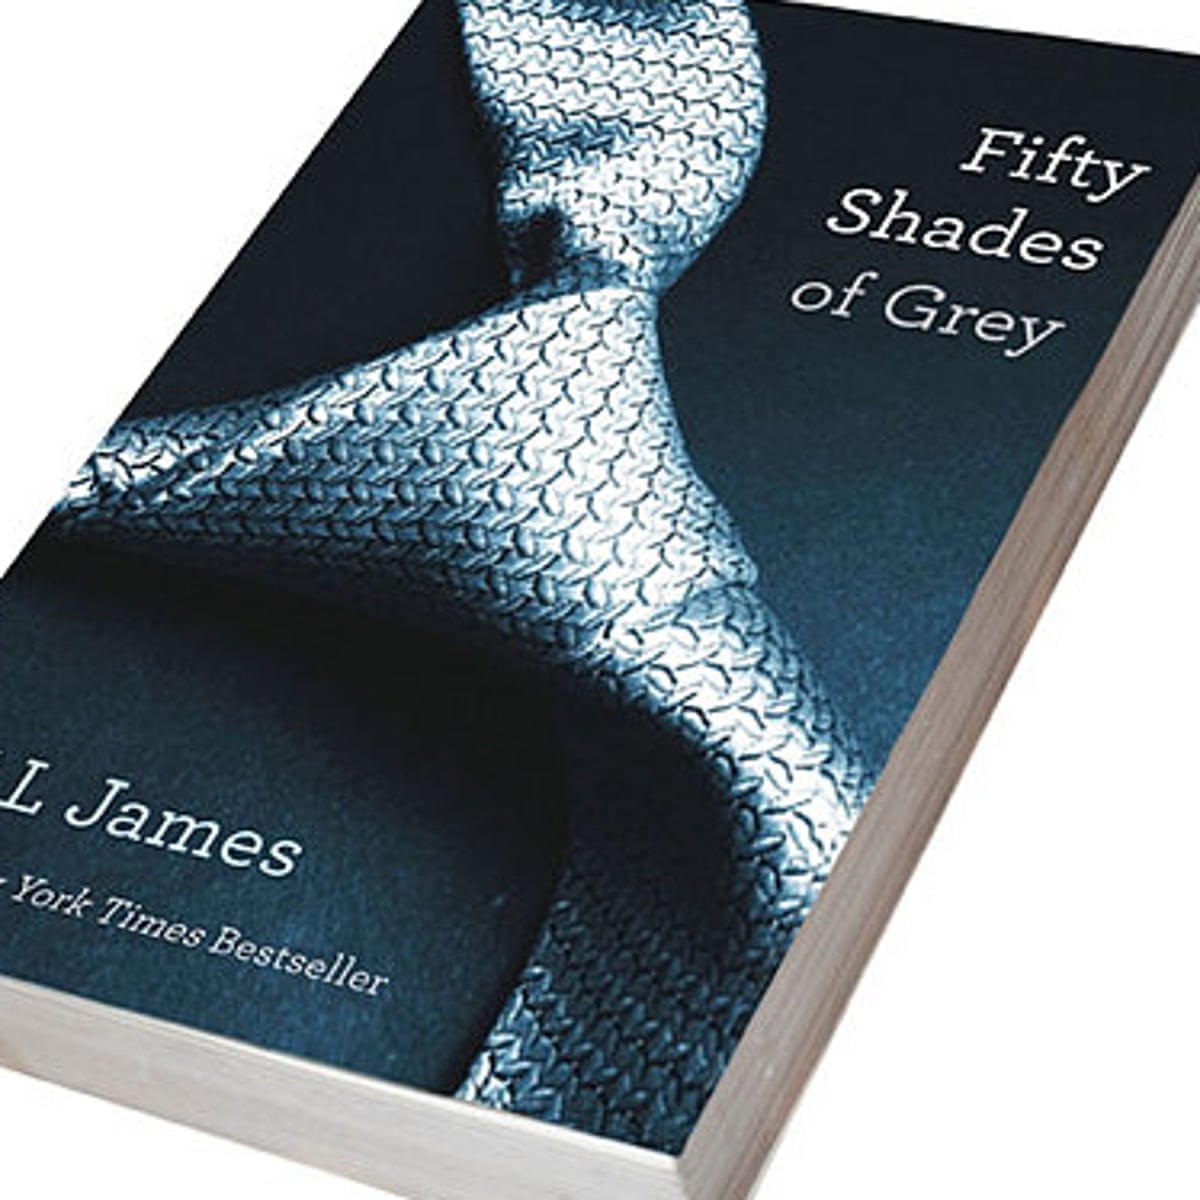 Fifty Shades of Grey publisher ordered to pay $11.5m in royalties to teache...